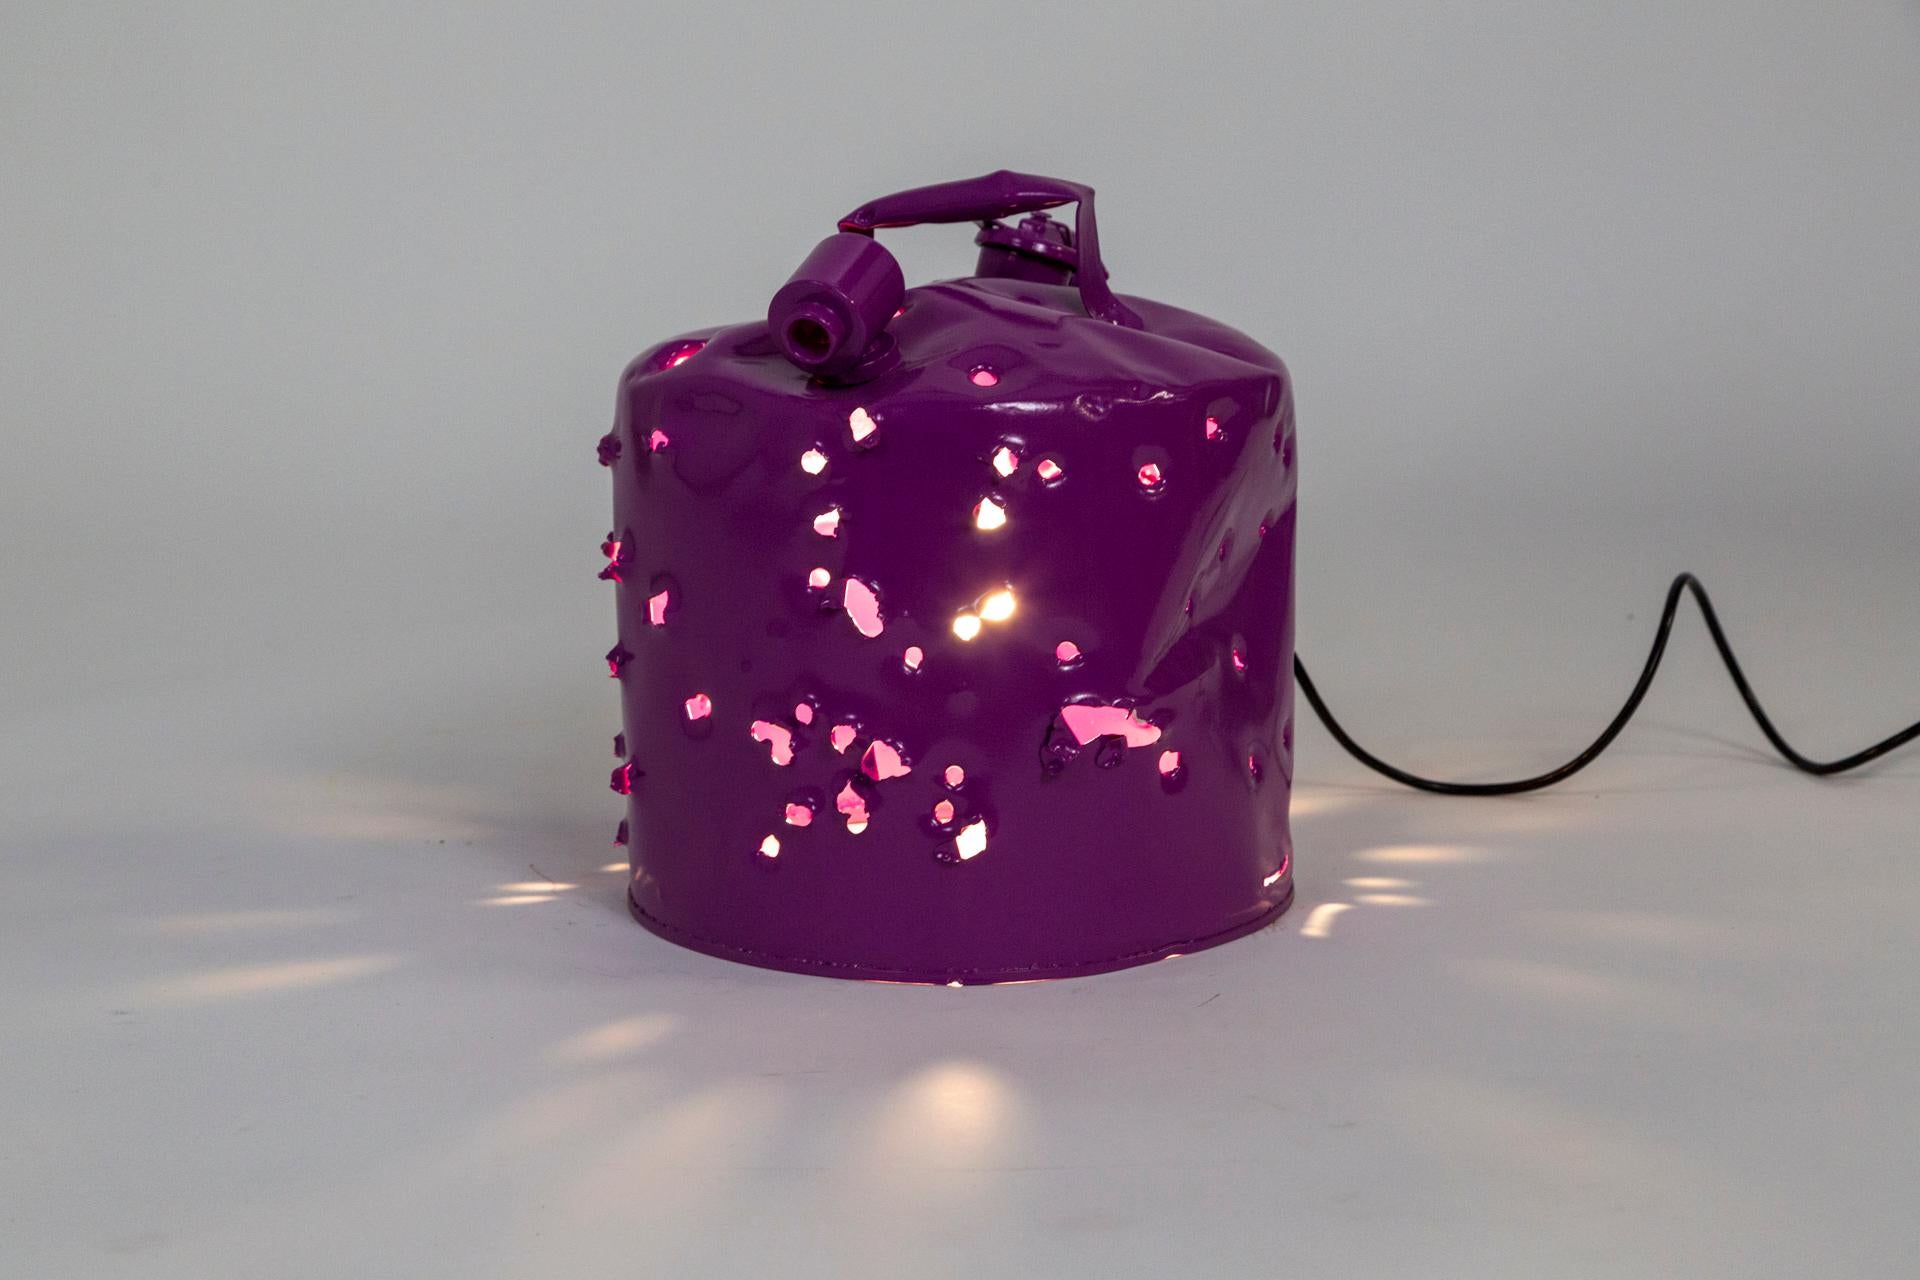 This antique metal gas can was shot with bullets, powder coated and wired as a lamp to become a bold work of art made Charles Linder. He has been making artwork out of bullet-riddled objects for over 30 years. The light coming through the holes has